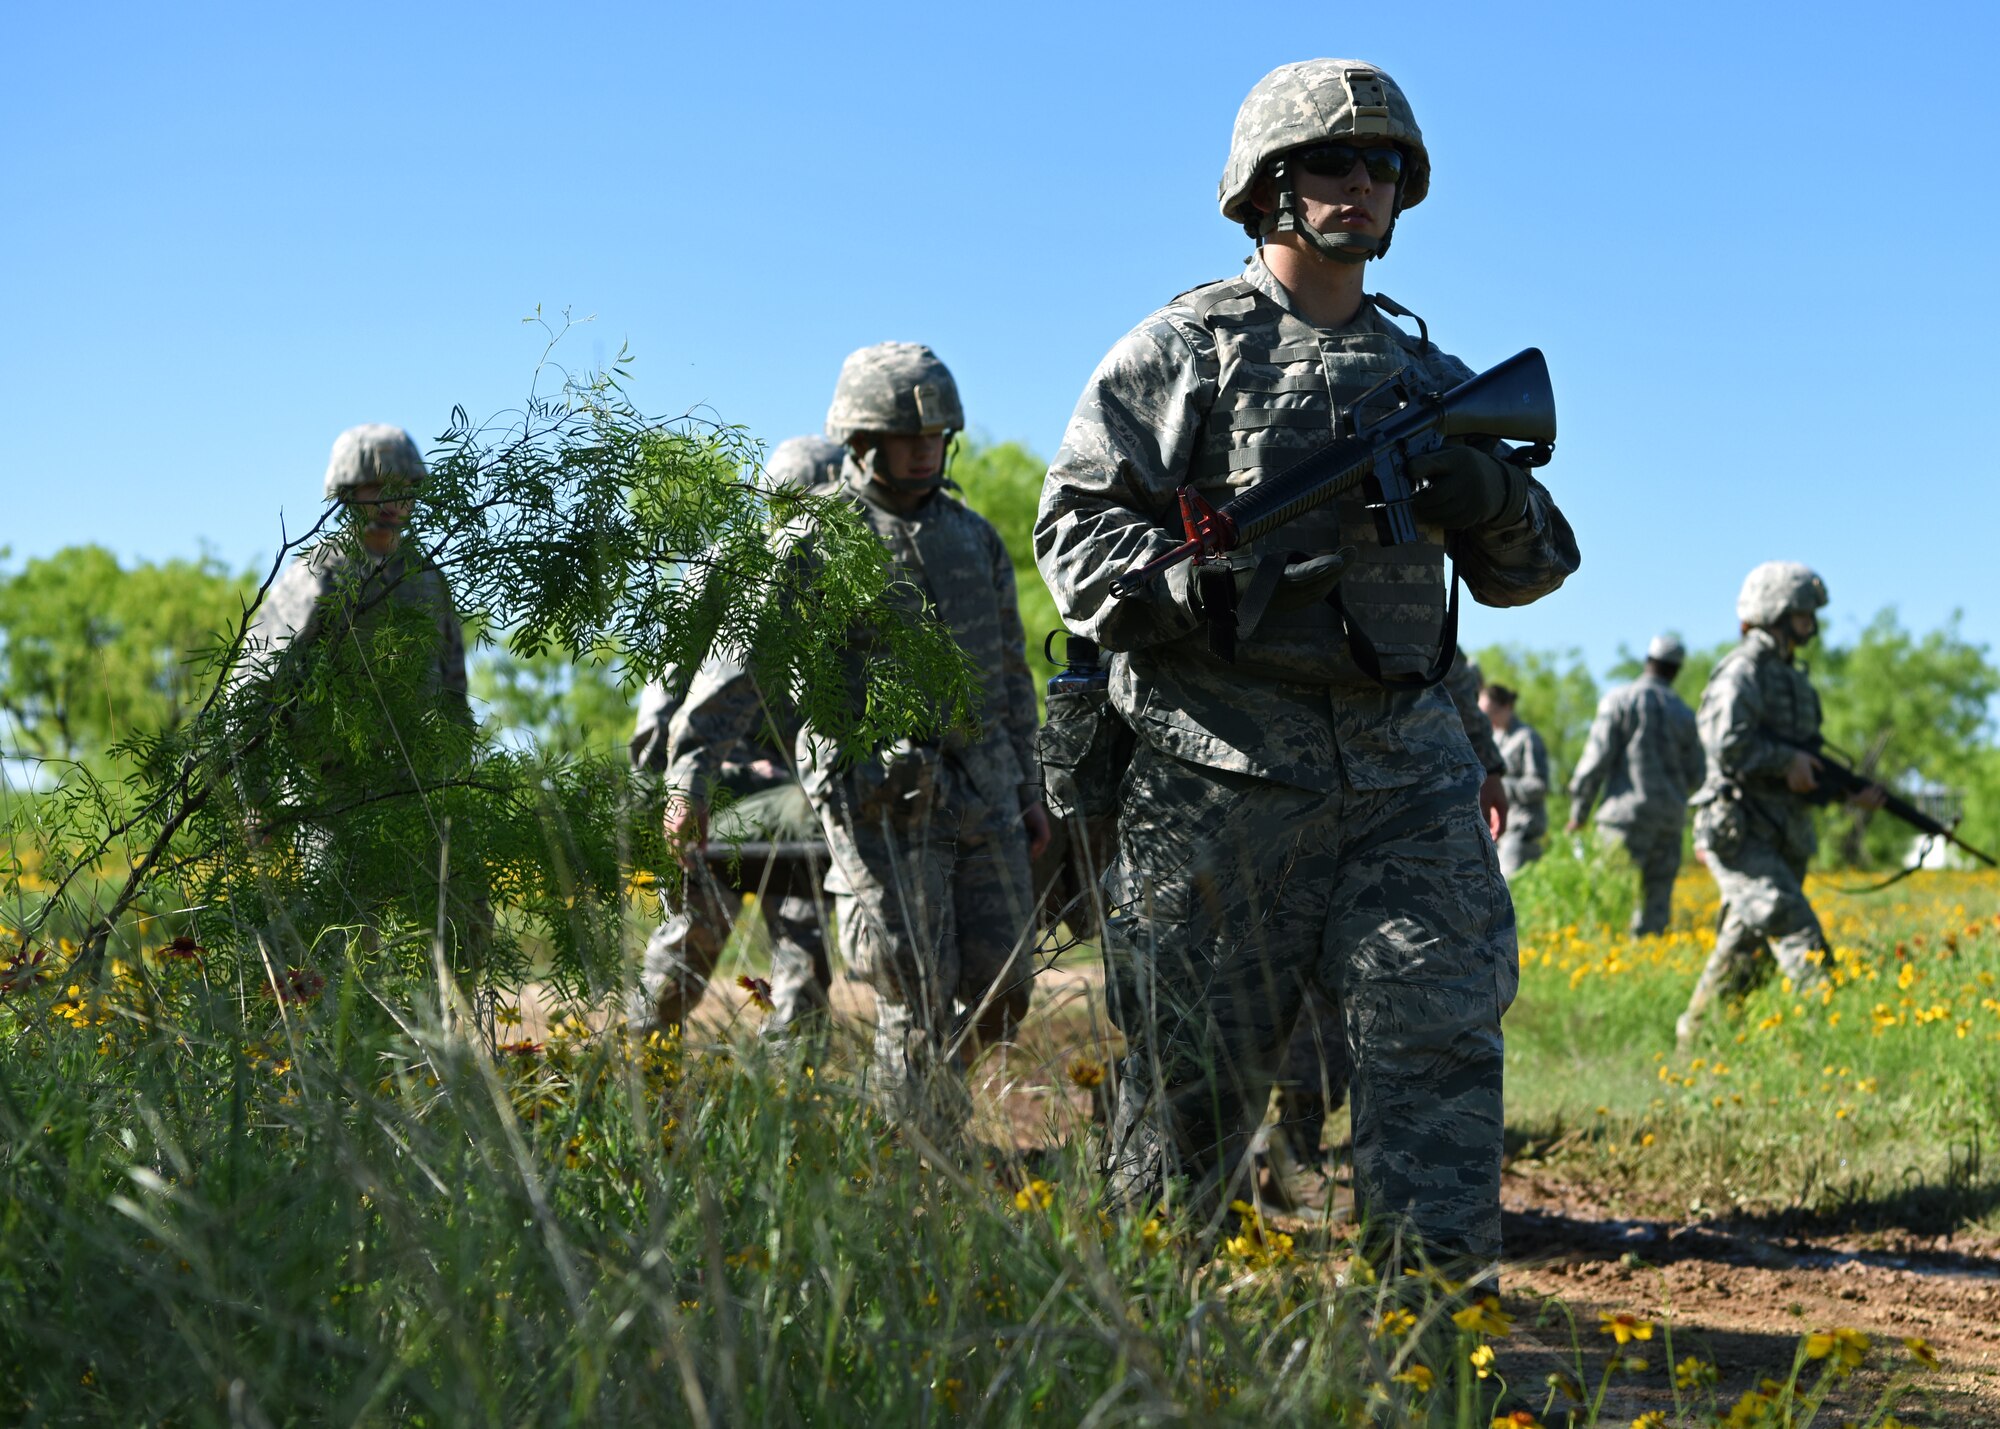 Angelo State University Air Force ROTC Cadets escort their injured wingman back to their forward operating base Camp Sentinel during their field training exercise at Goodfellow Air Force Base, Texas, April 25, 2019. The cadets marched in a wedge formation to allow immediate fire in all directions in case of an attack. (U.S. Air Force photo by Airman 1st Class Ethan Sherwood/Released)